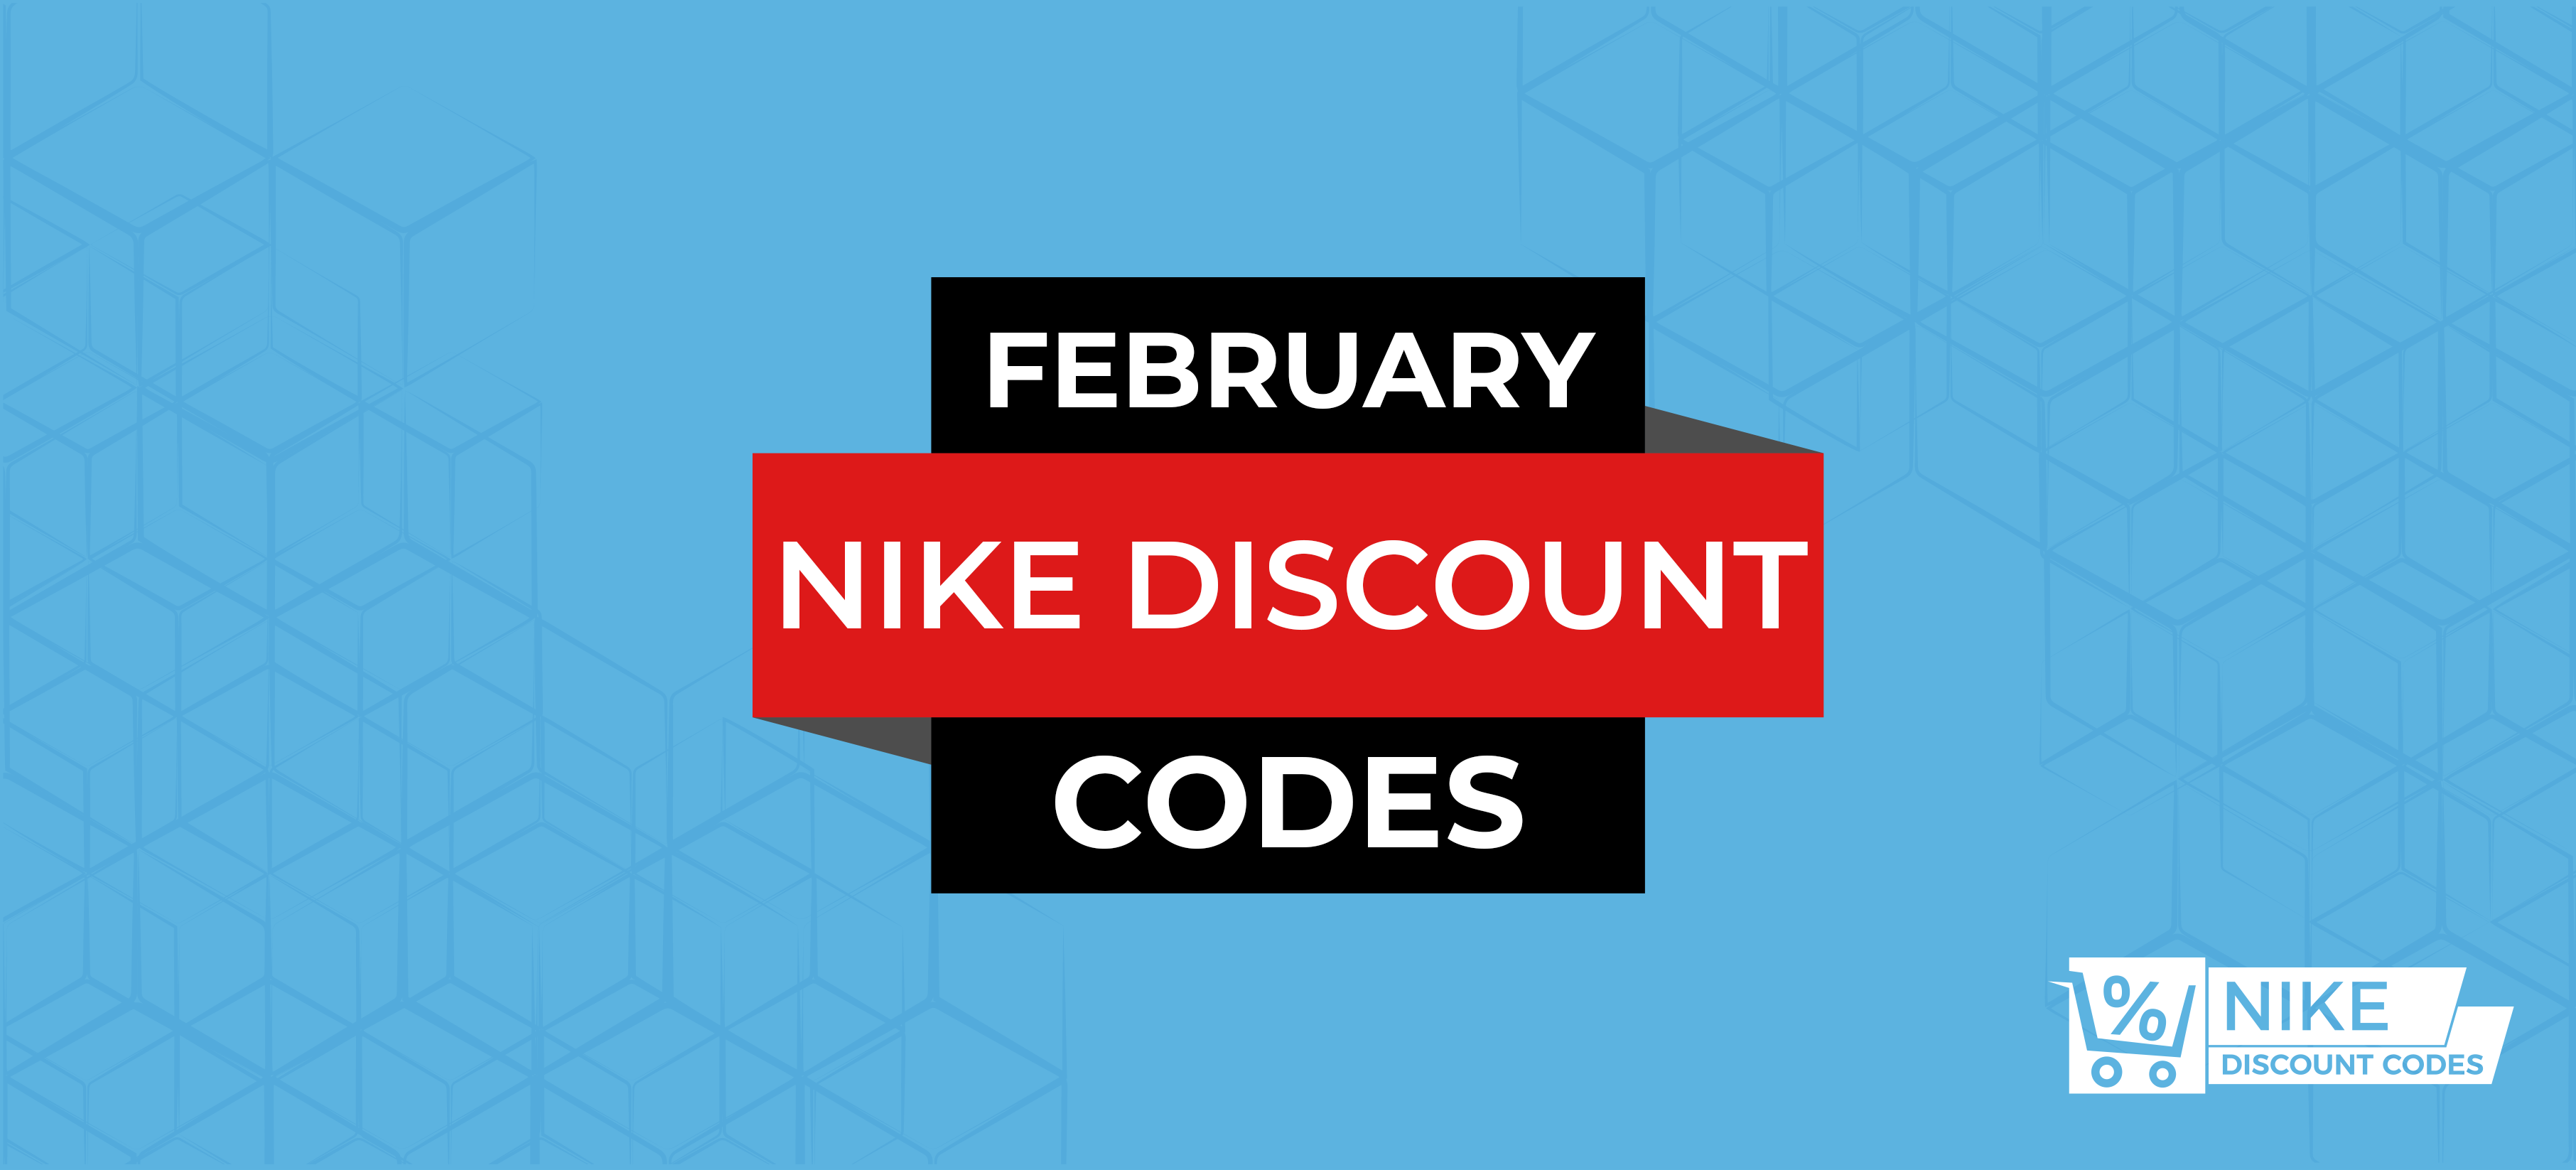 nike discount code march 2020